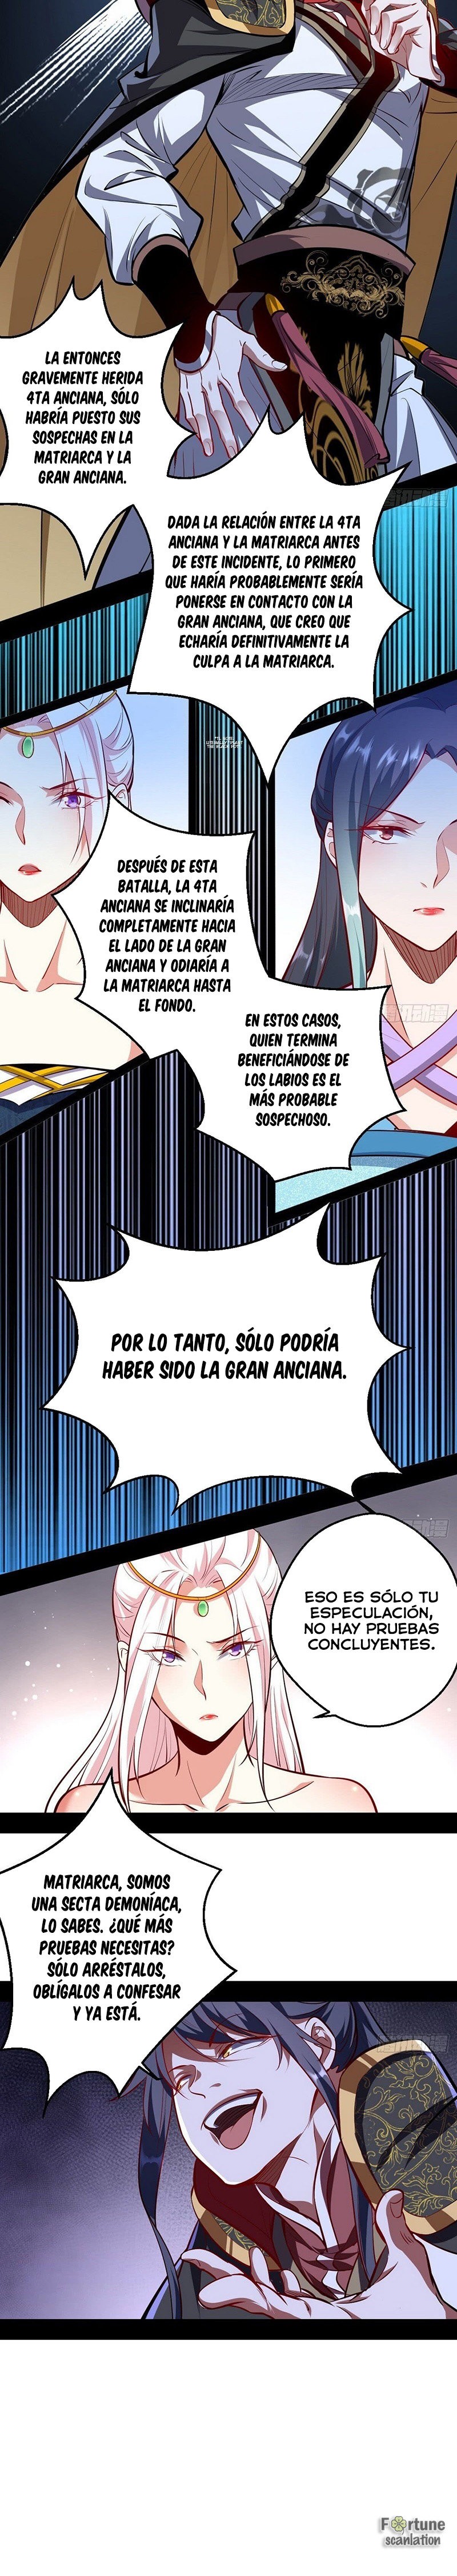 Manga Soy un dios maligno Chapter 40 image number 24